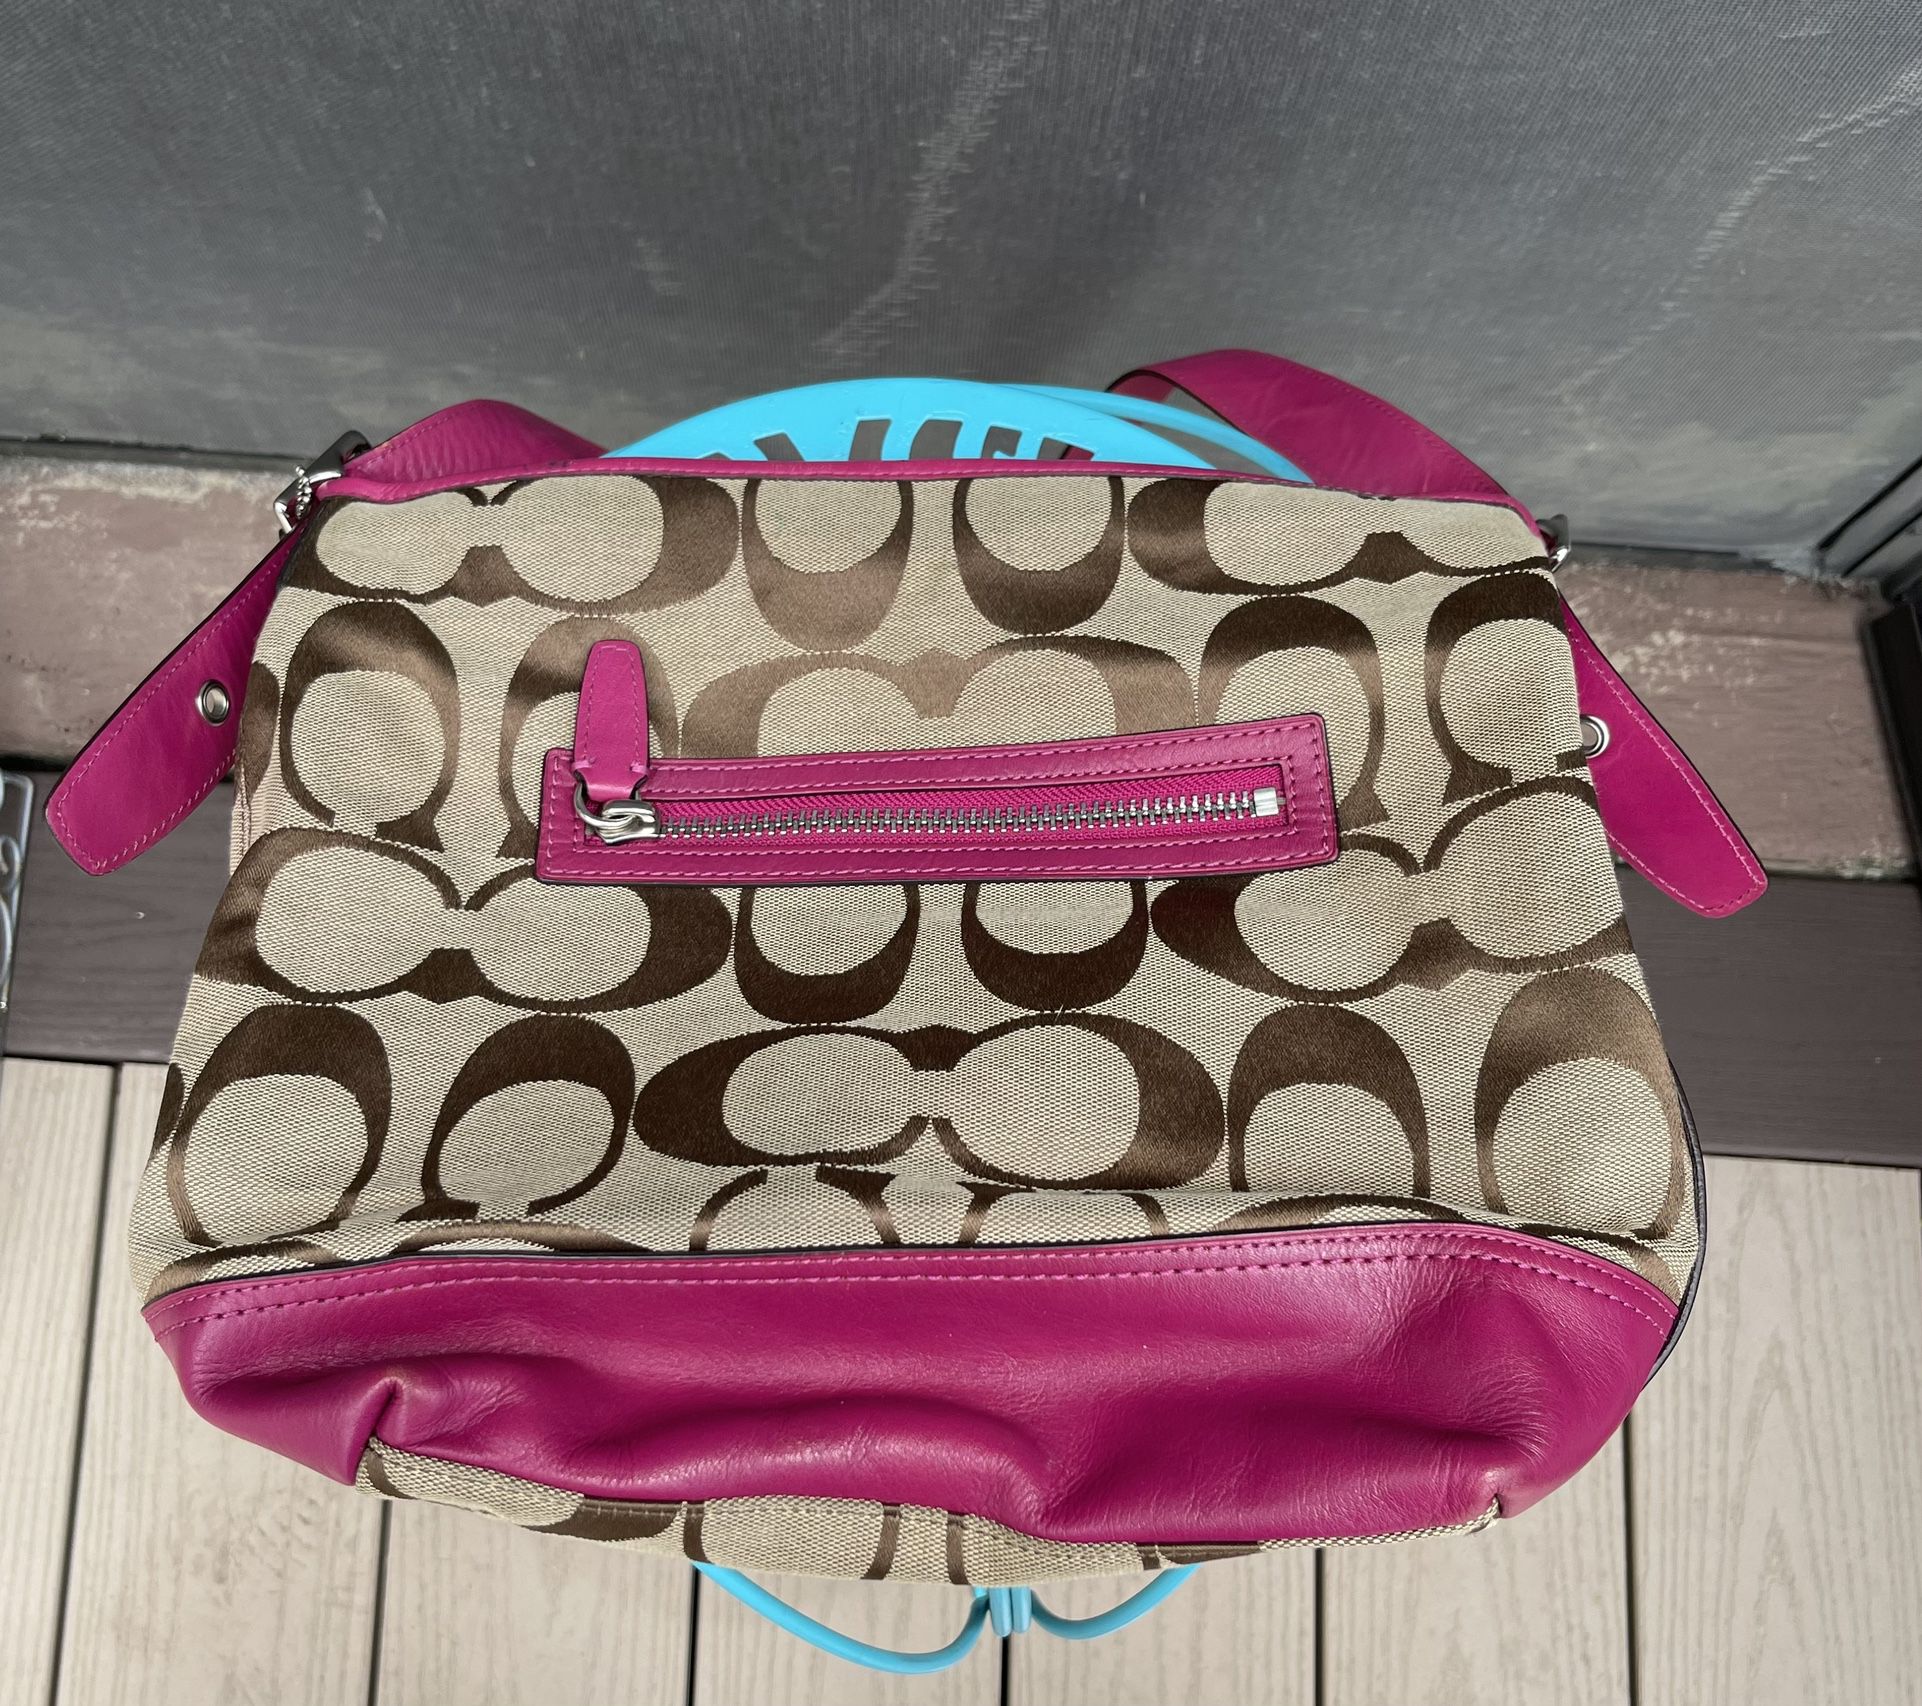 Coach Handbag With Hot Pink Trim for Sale in Boca Raton, FL